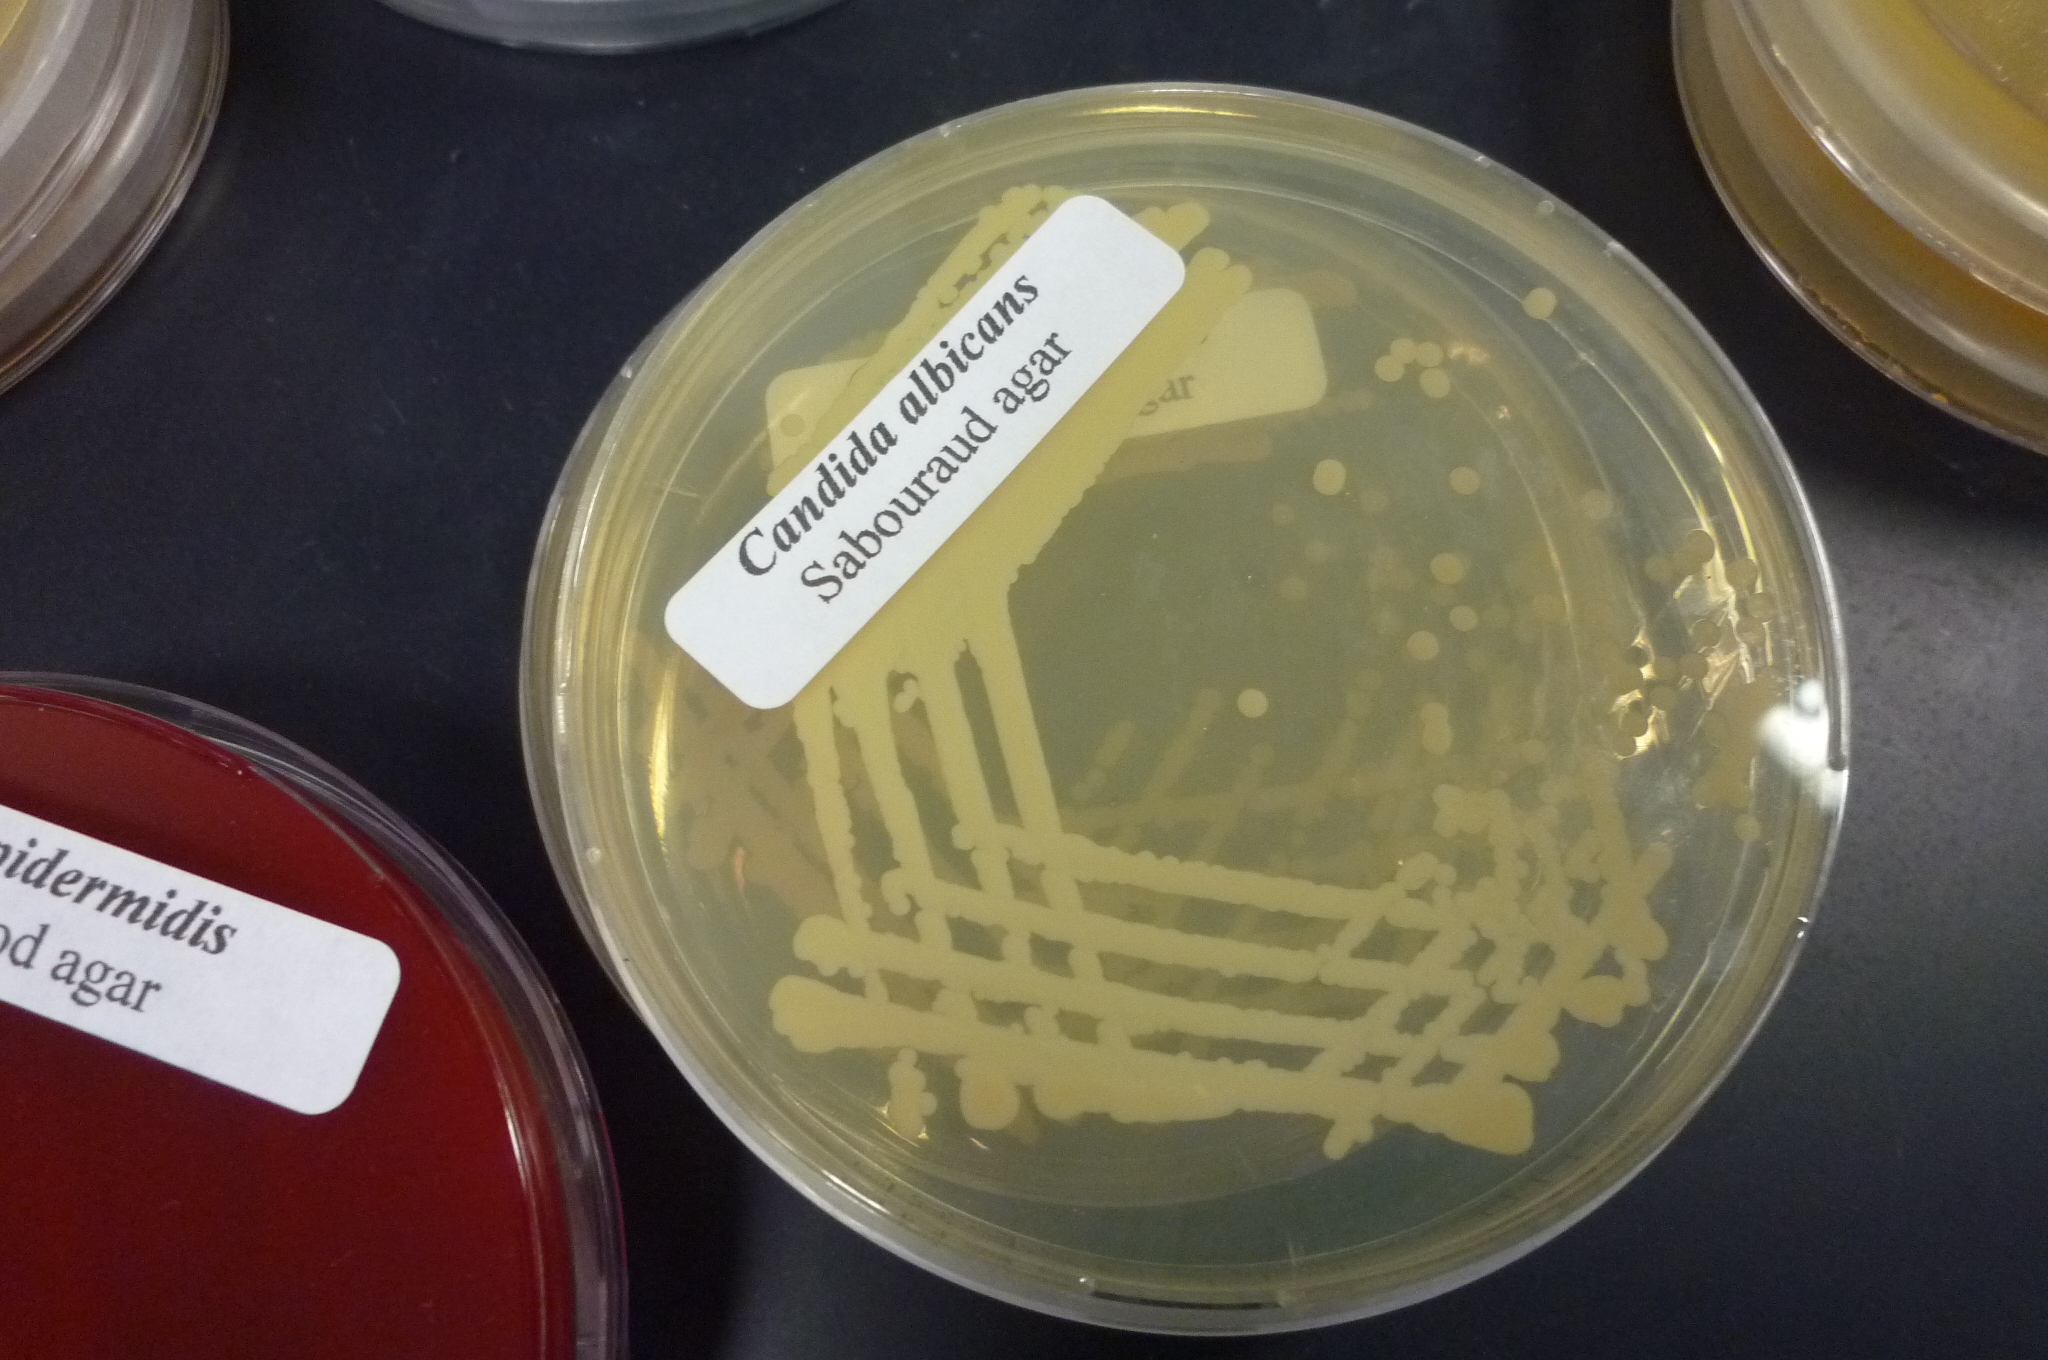 File:Candida albicans on Sabaroud agar medium - By Sun14916 - Own work, CC BY-SA 3.0, httpscommons.wikimedia.orgwindex.phpcurid=18864149.jpg